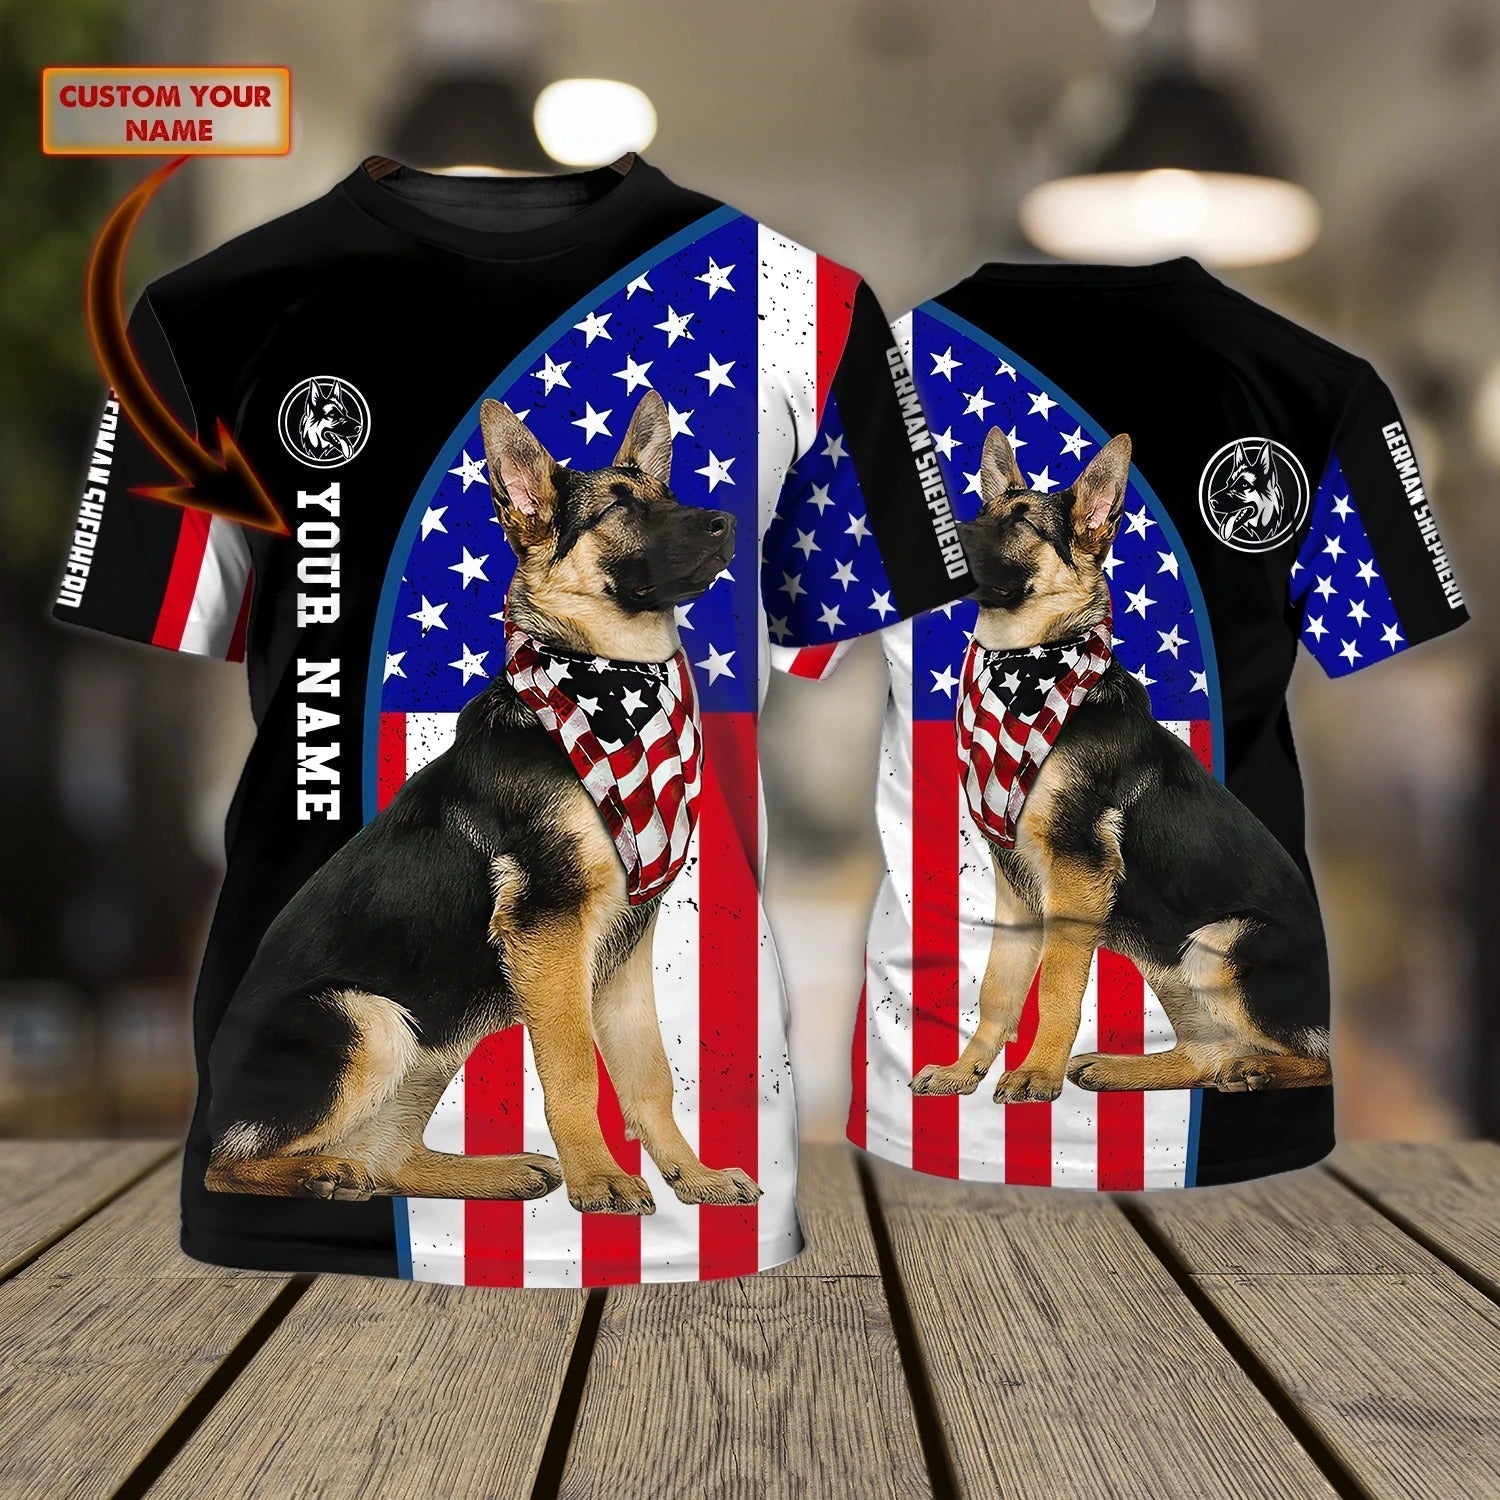 Personalized 3D Full Printed Dog In Tshirt/ German Shepherd Shirts For Adult/ Dog Tshirt For Him Her/ Dog Lover Shirt